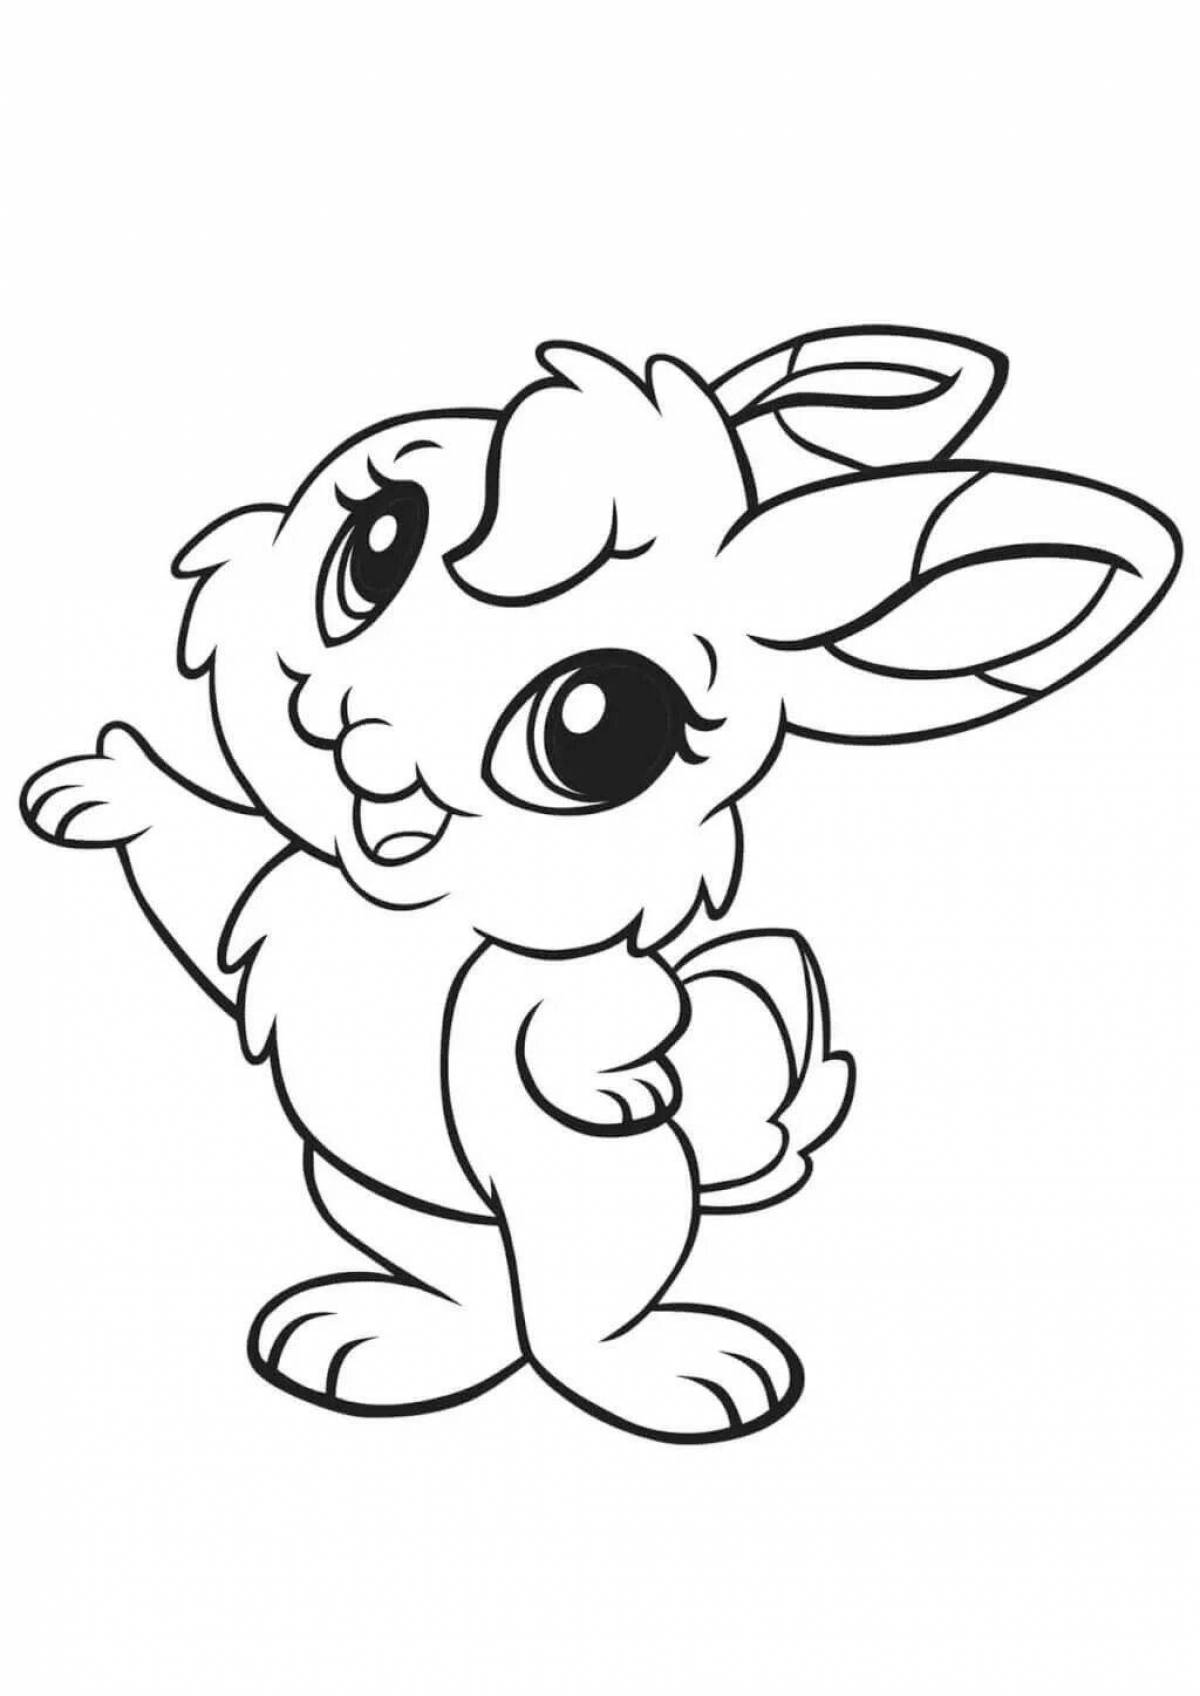 Cute animals coloring page for kids